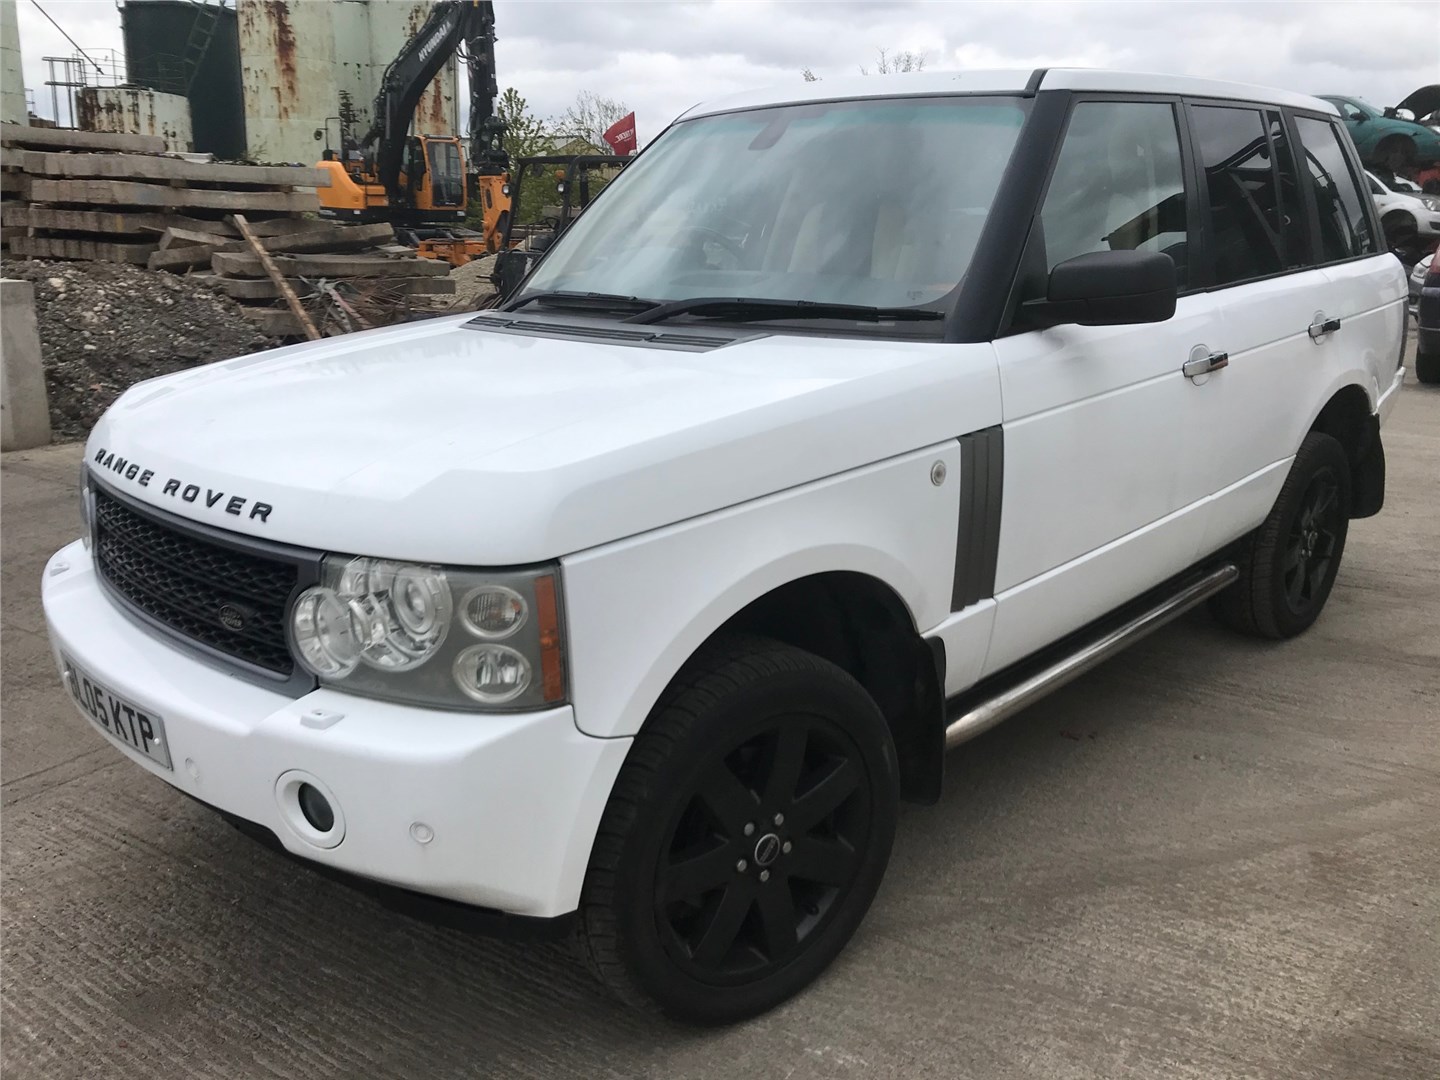 YIP500340 Дисплей мультимедиа Land Rover Range Rover 3 (LM) 2002-2012 2005